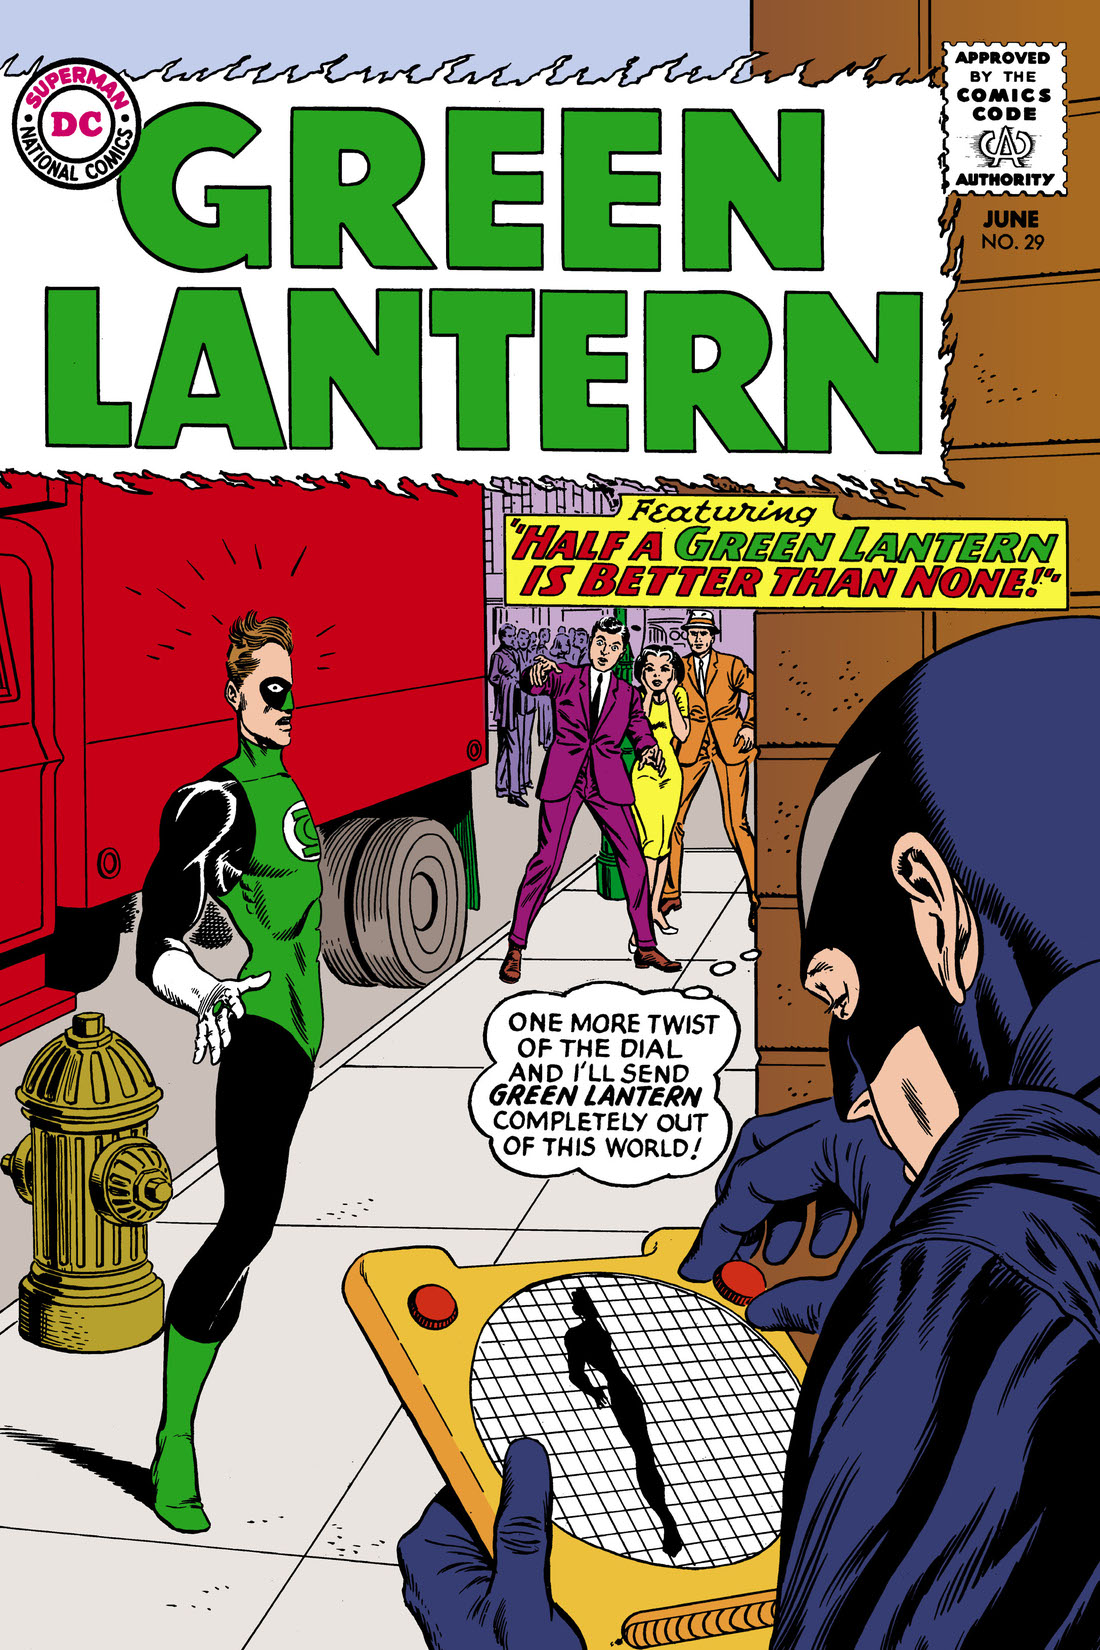 Green Lantern (1960-) #29 preview images